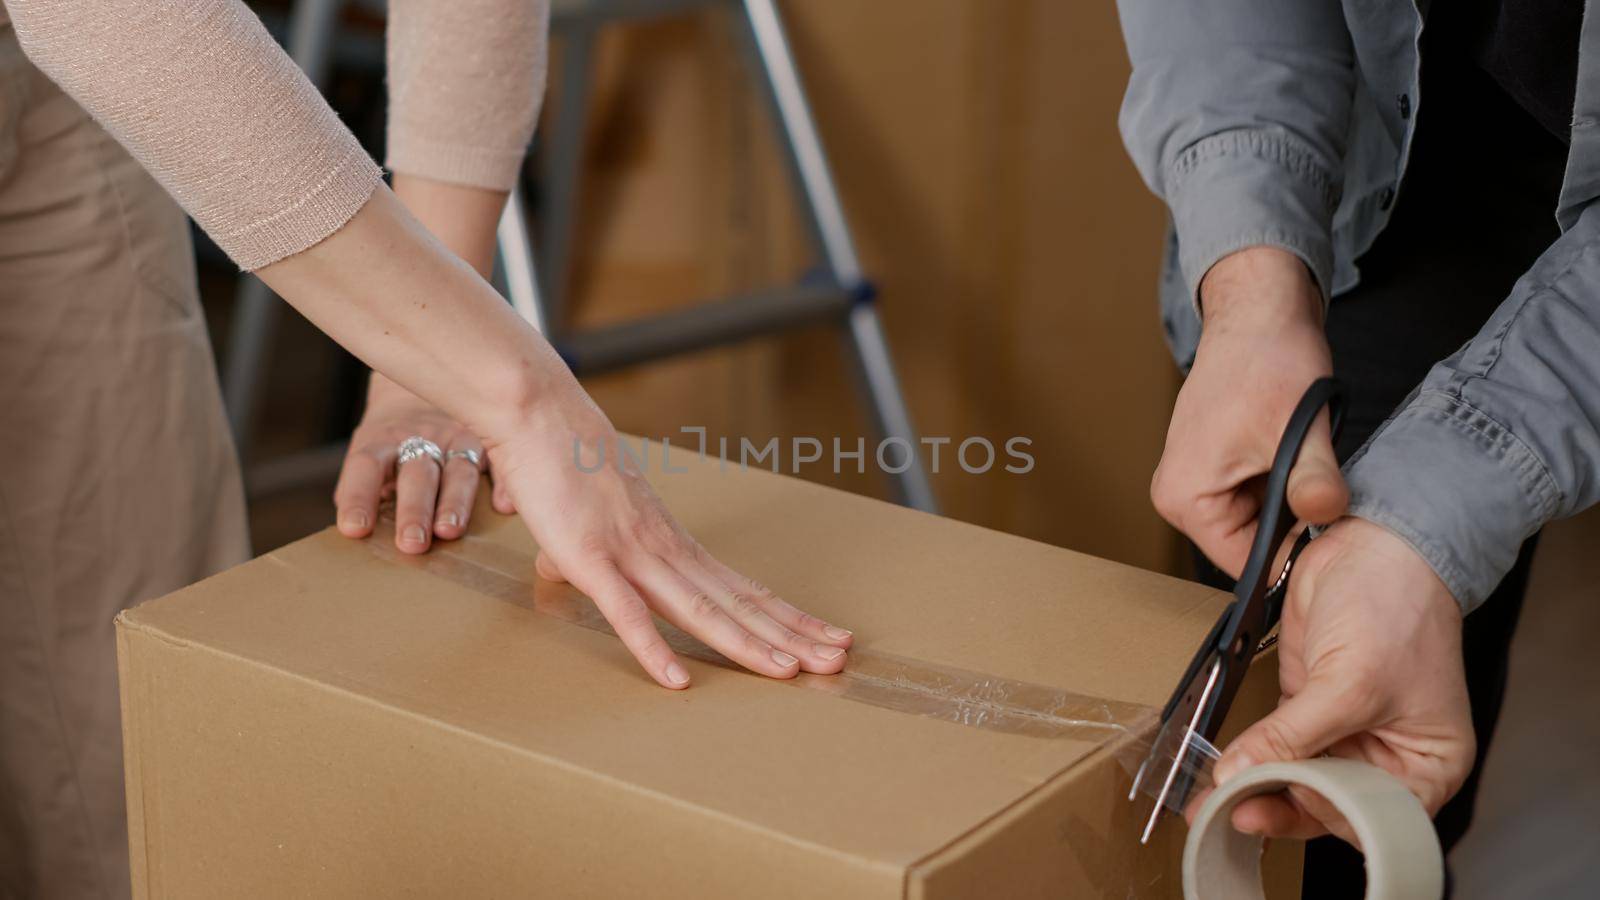 Couple using adhesive tape to pack things in cardboard boxes by DCStudio